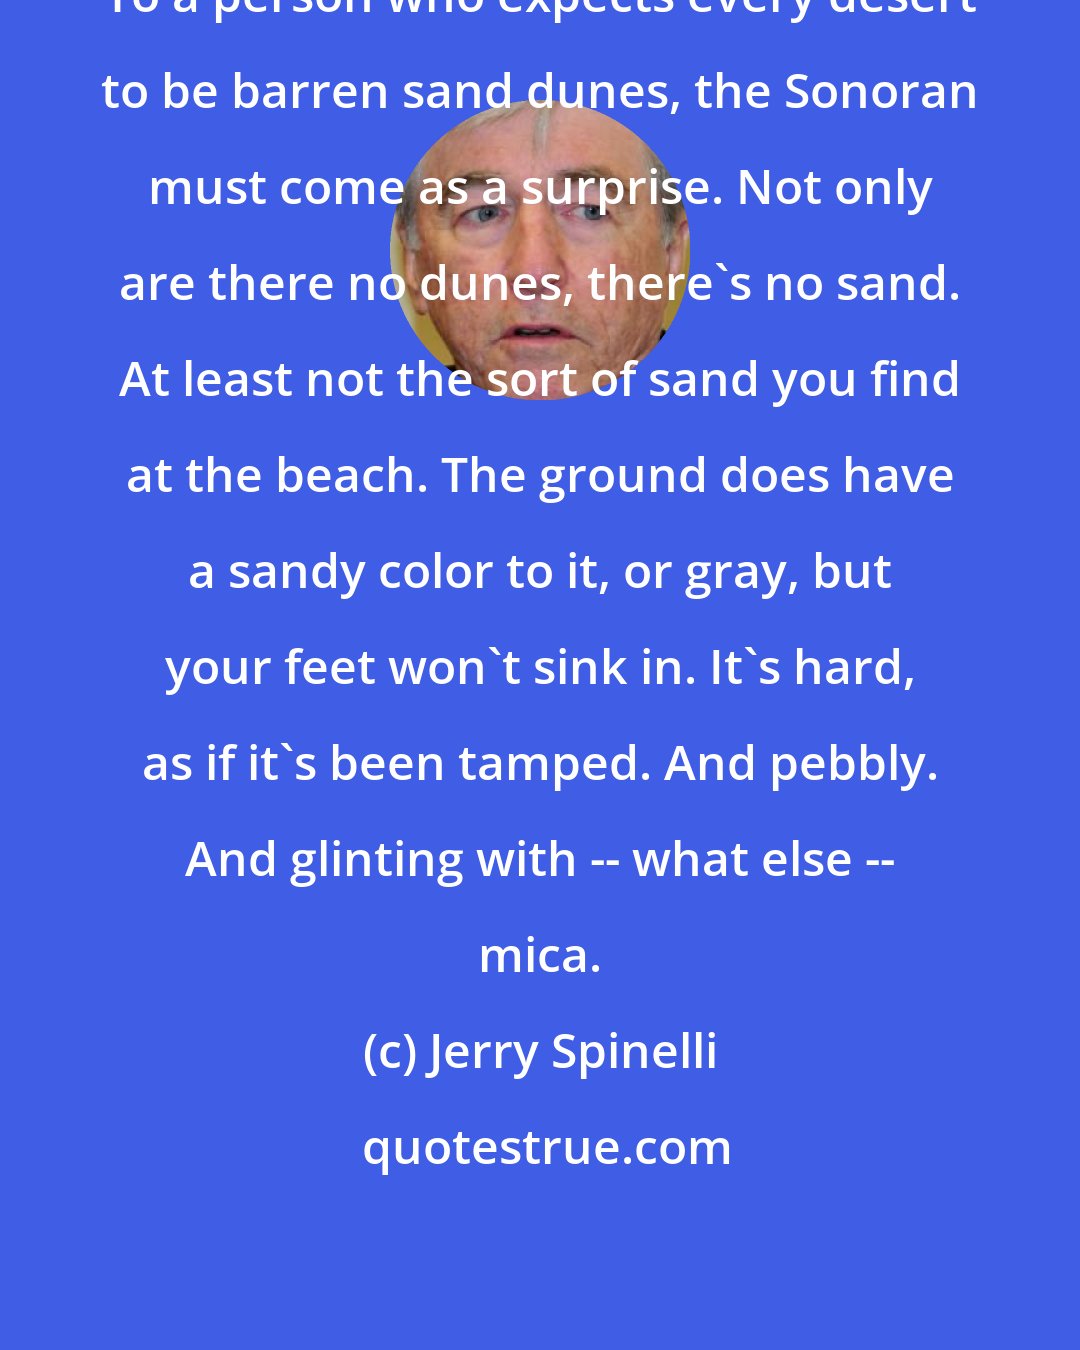 Jerry Spinelli: To a person who expects every desert to be barren sand dunes, the Sonoran must come as a surprise. Not only are there no dunes, there's no sand. At least not the sort of sand you find at the beach. The ground does have a sandy color to it, or gray, but your feet won't sink in. It's hard, as if it's been tamped. And pebbly. And glinting with -- what else -- mica.